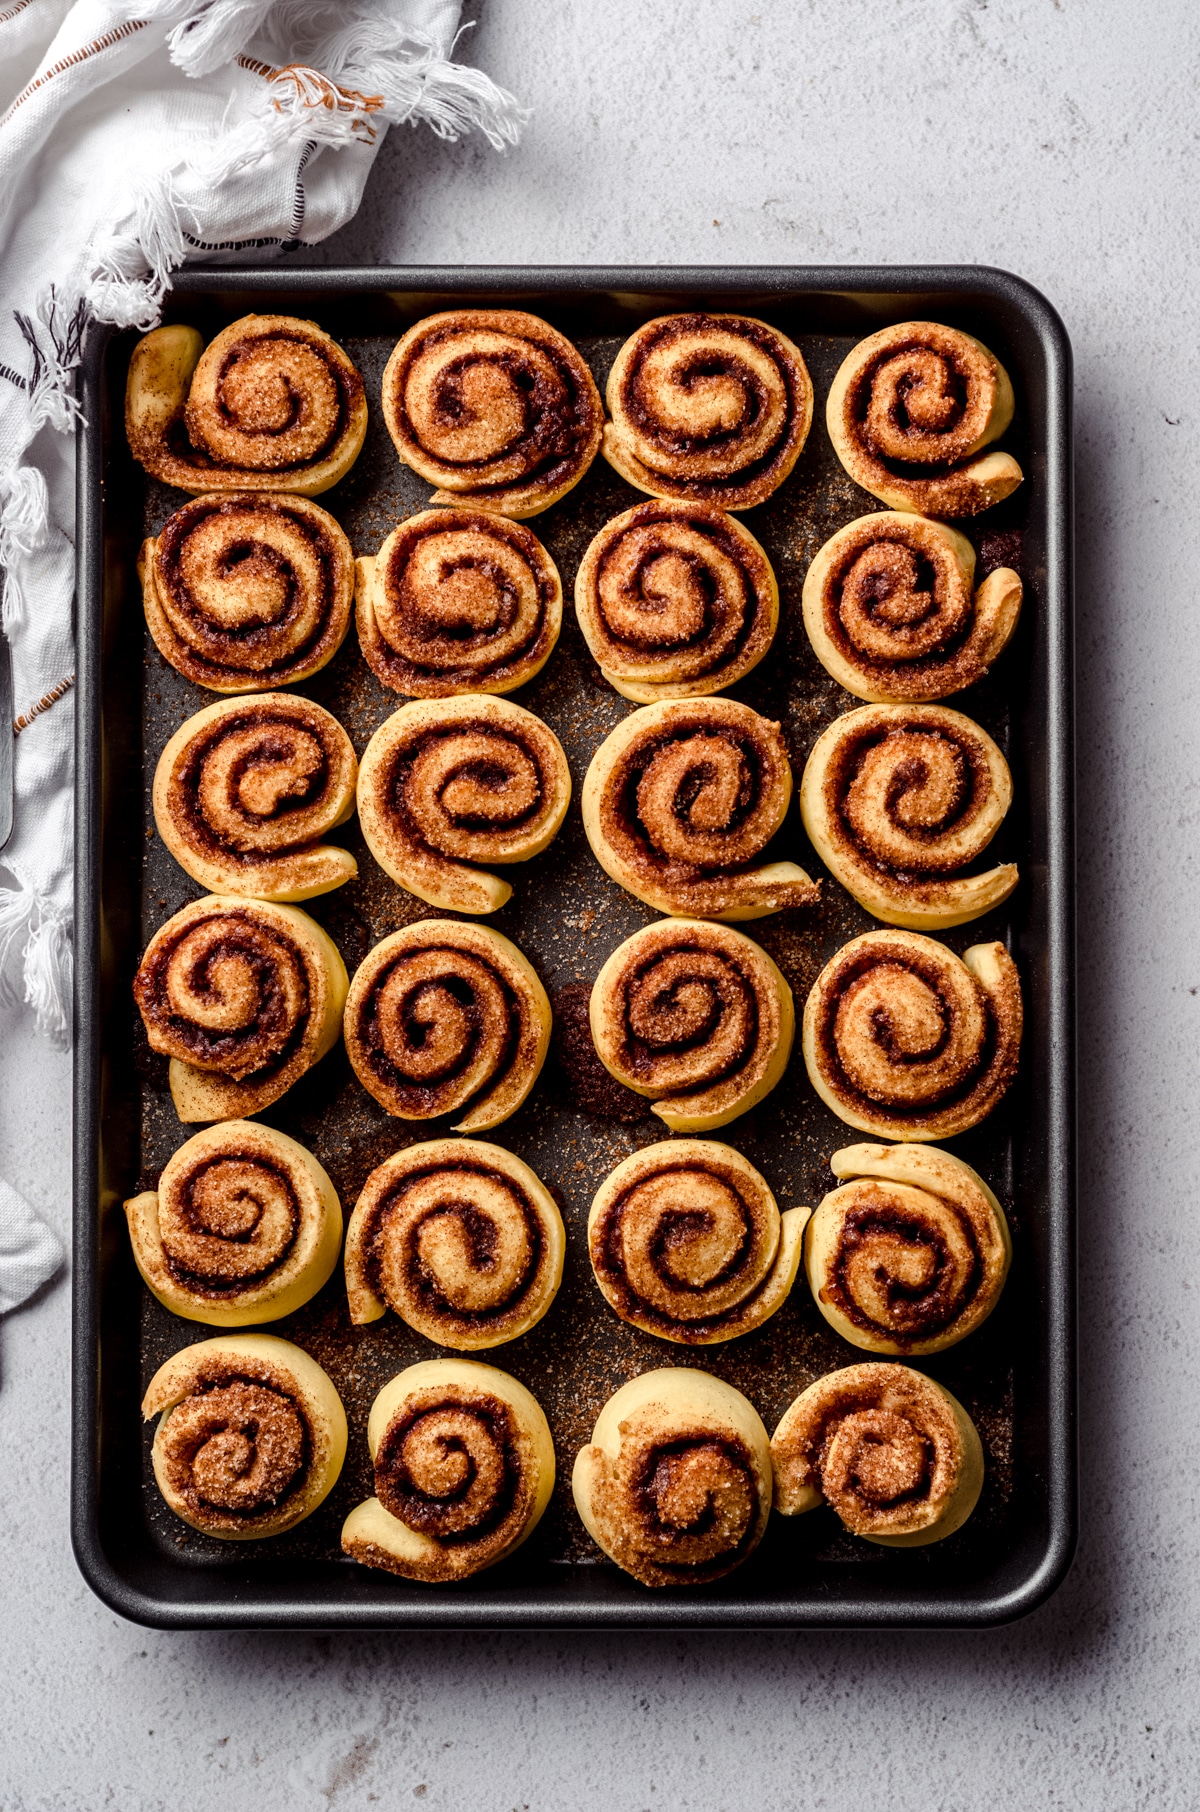 Aerial photo of mini cinnamon rolls baked in a baking pan.